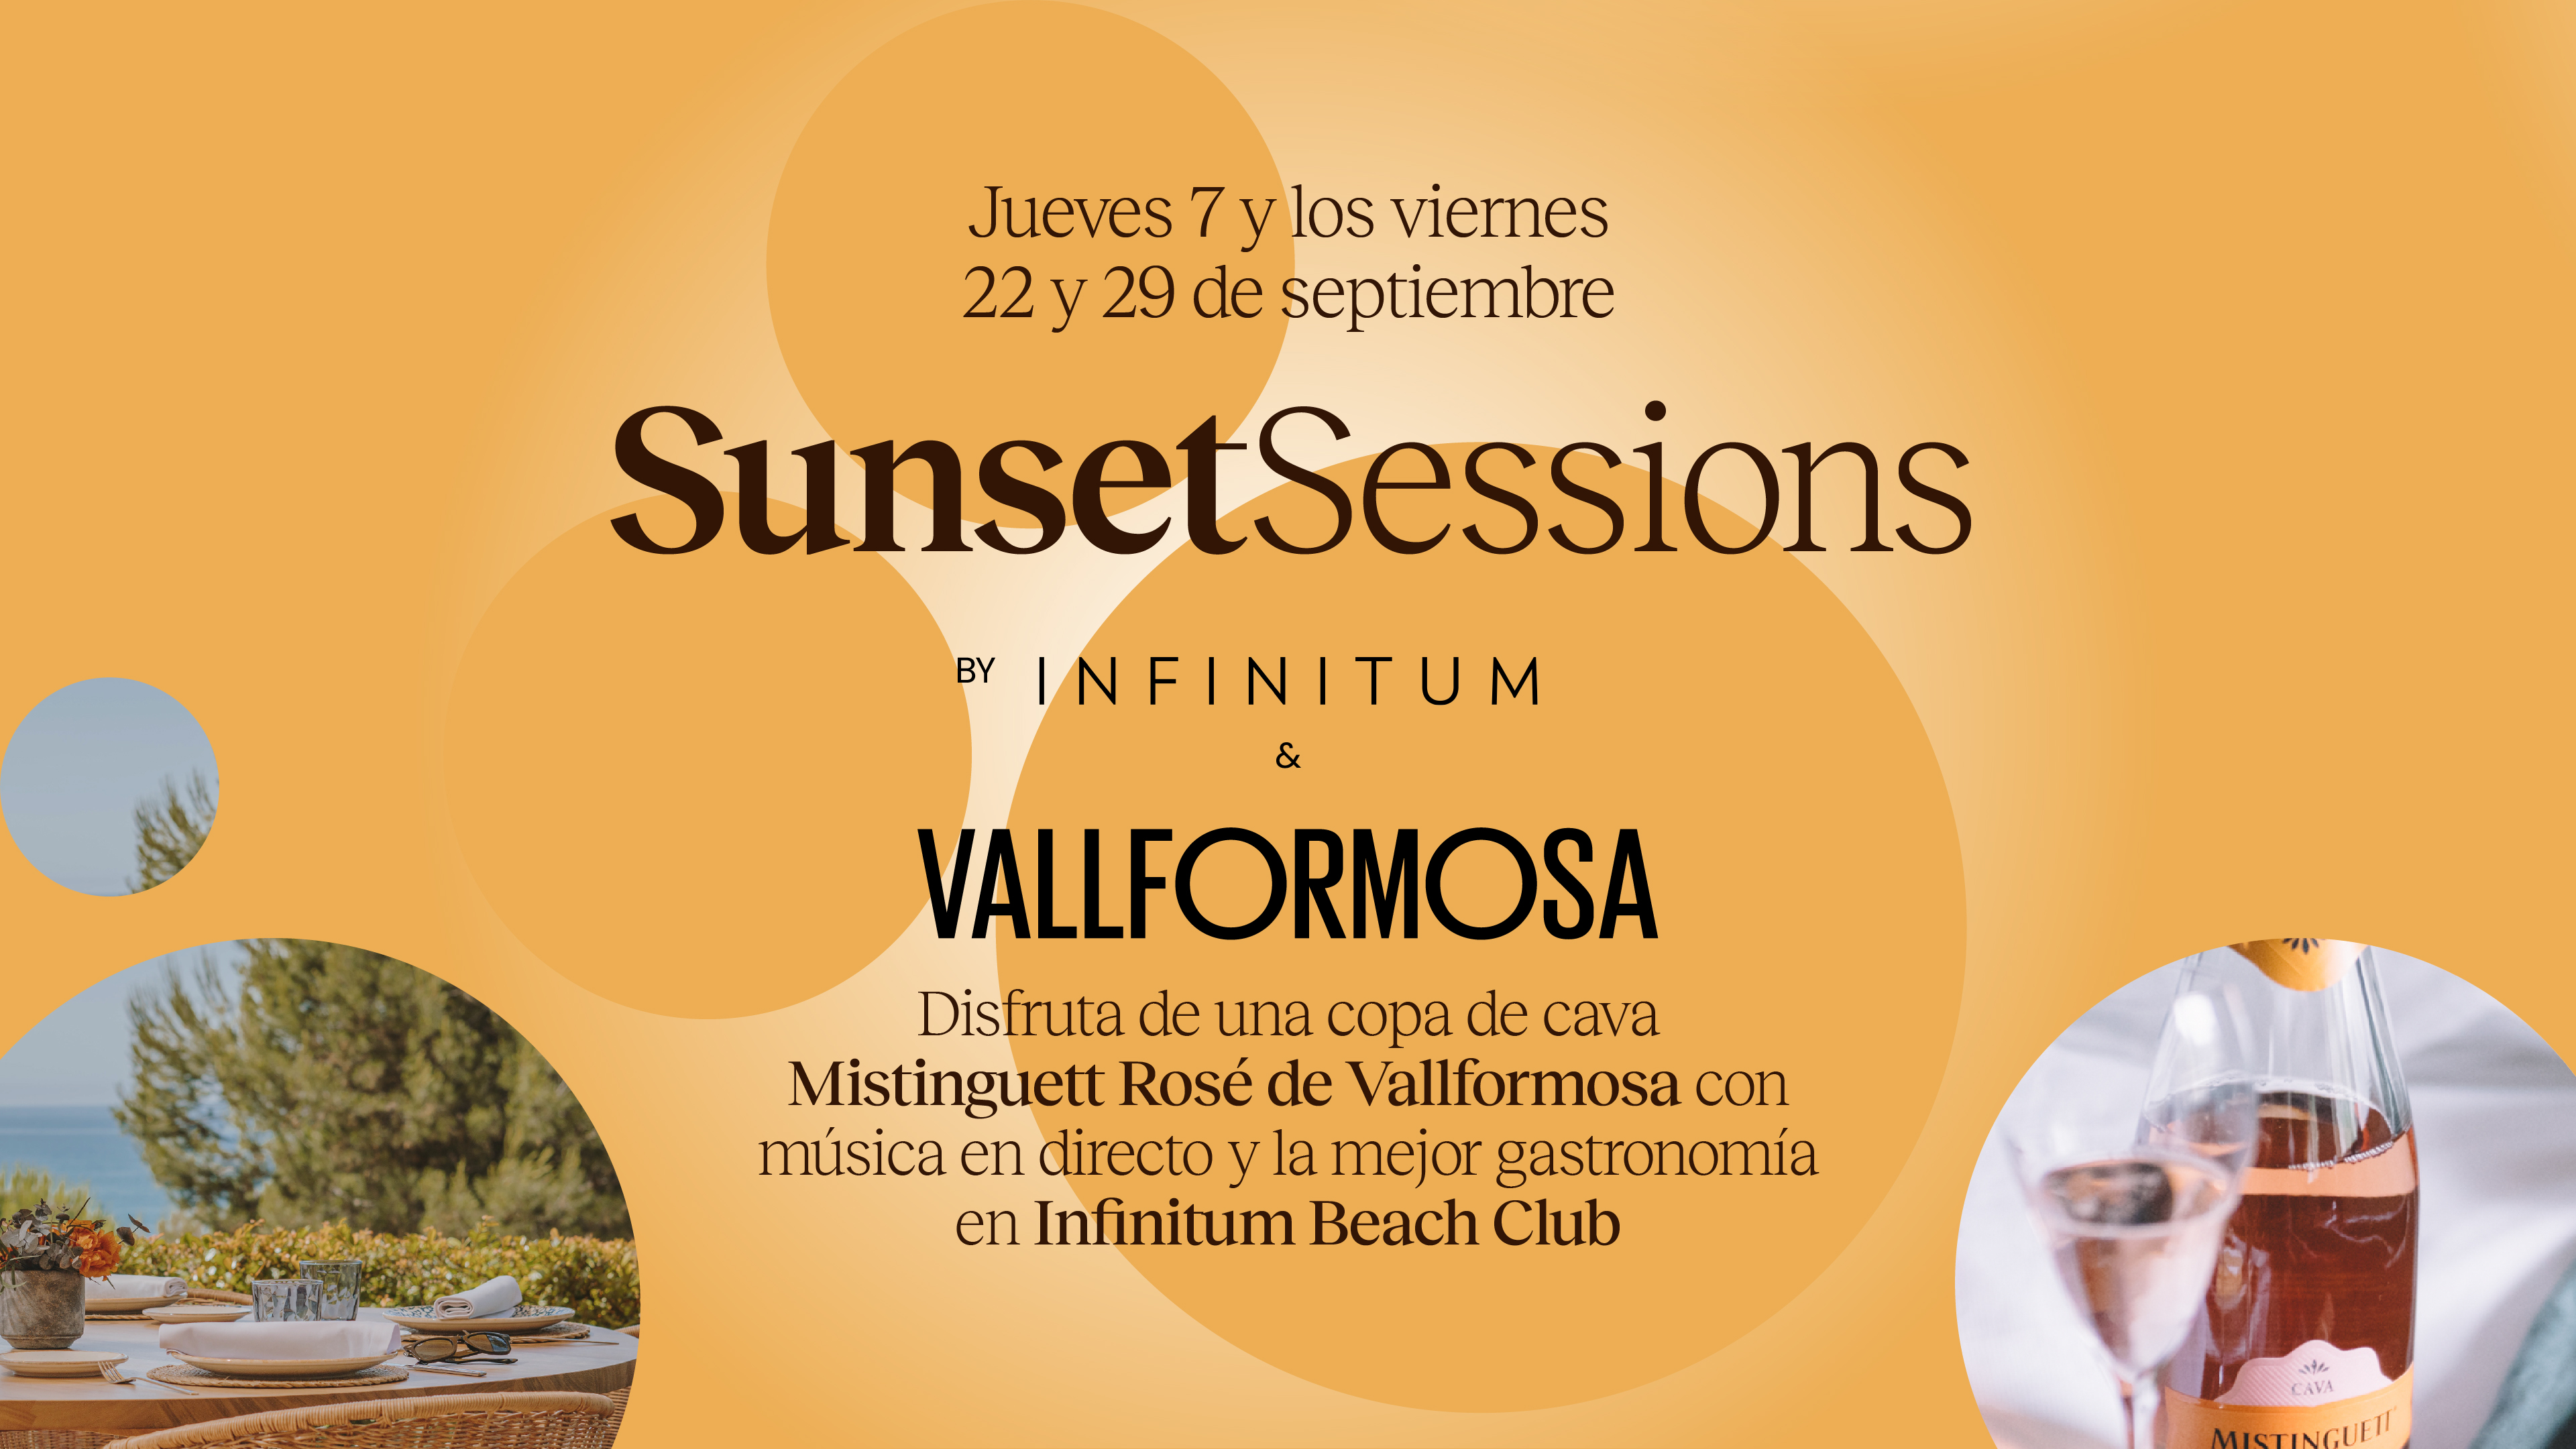 Sunset Sessions by INFINITUM & VALLFORMOSA